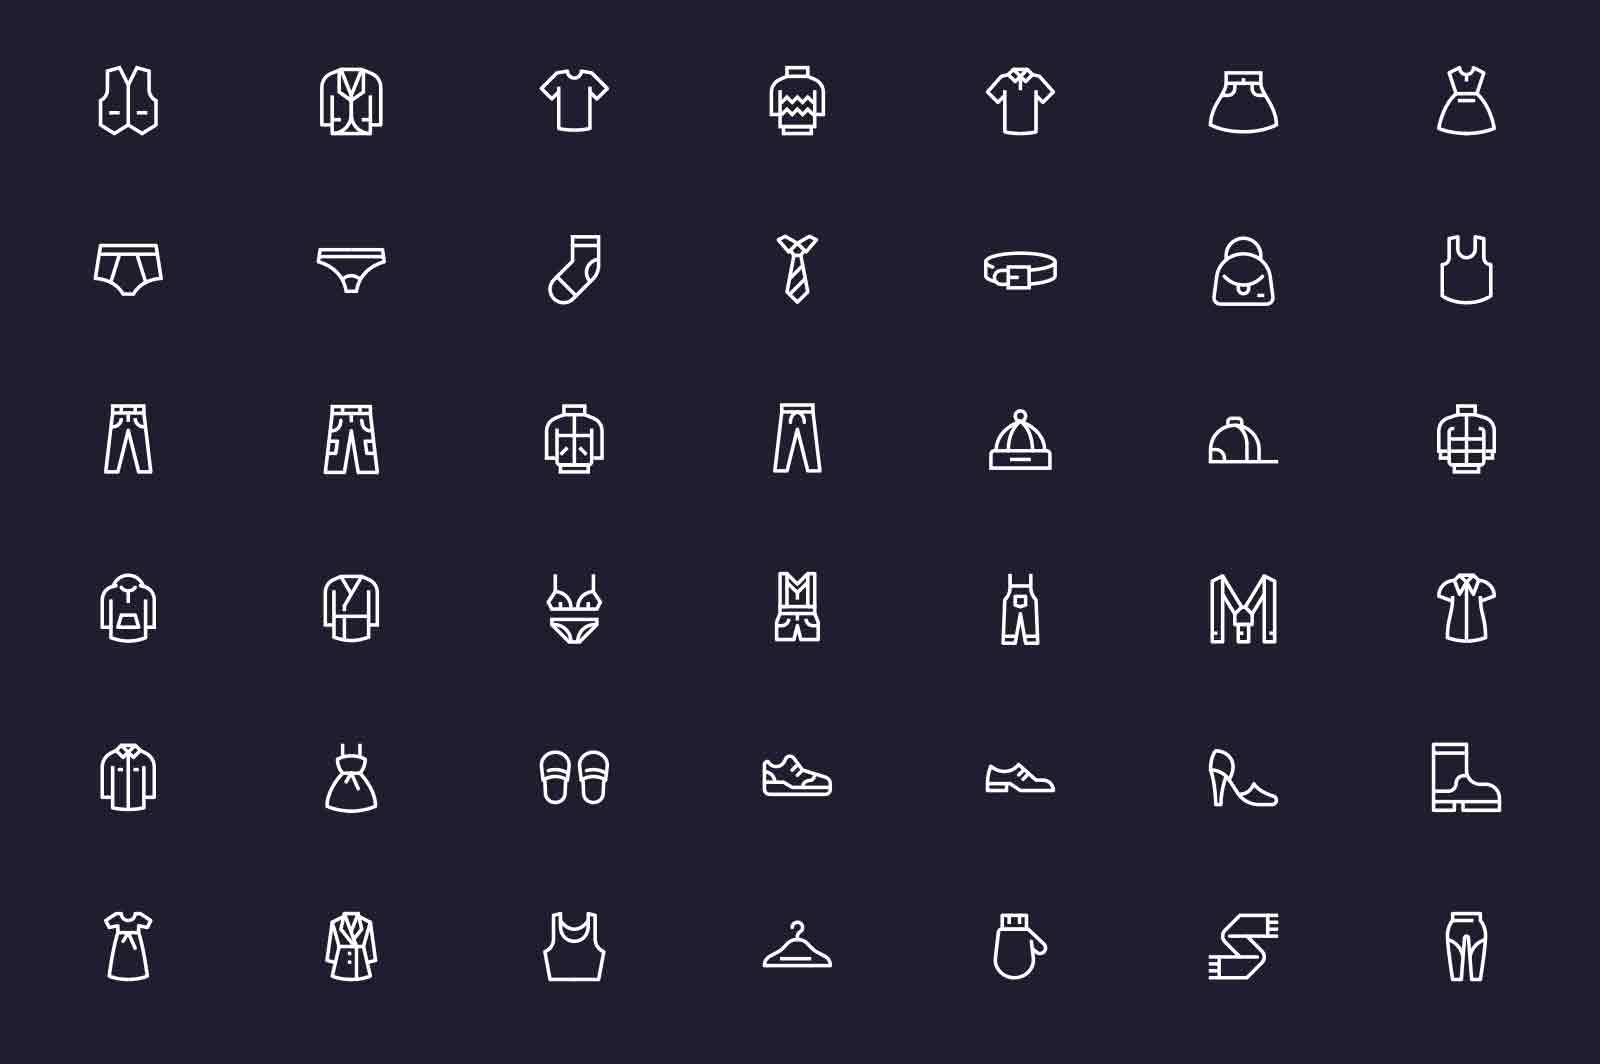 Womens and mens clothes icons set vector illustration. Fashion clothes and accessories line icon. Dark background